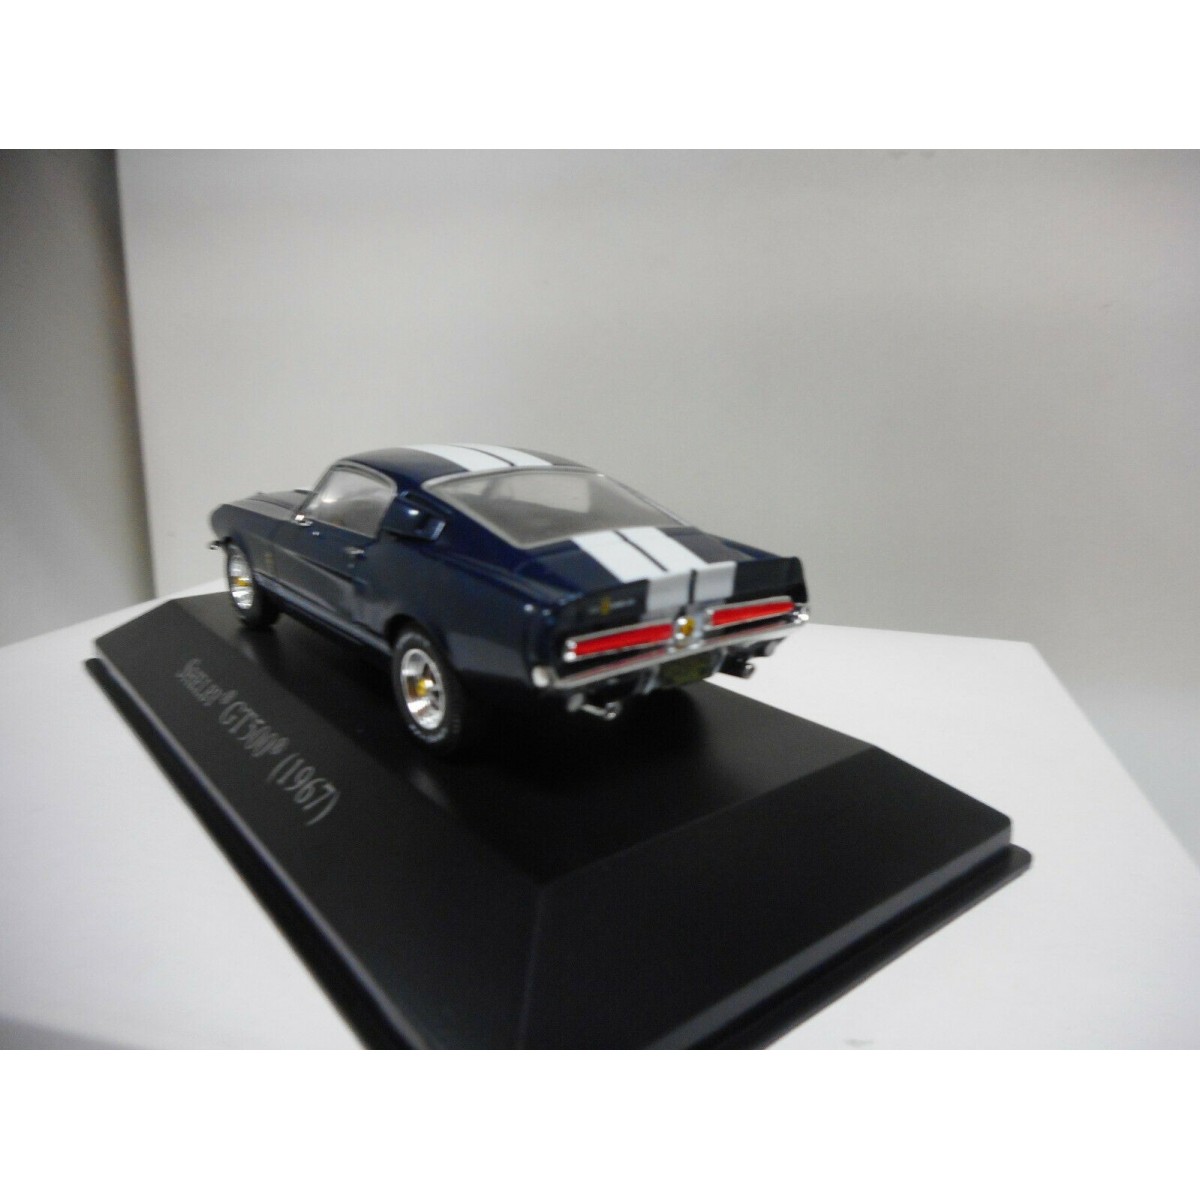 IXO FORD Mustang SHELBY GT 500 1967 American Cars 1:43 CAR Mint Altaya 